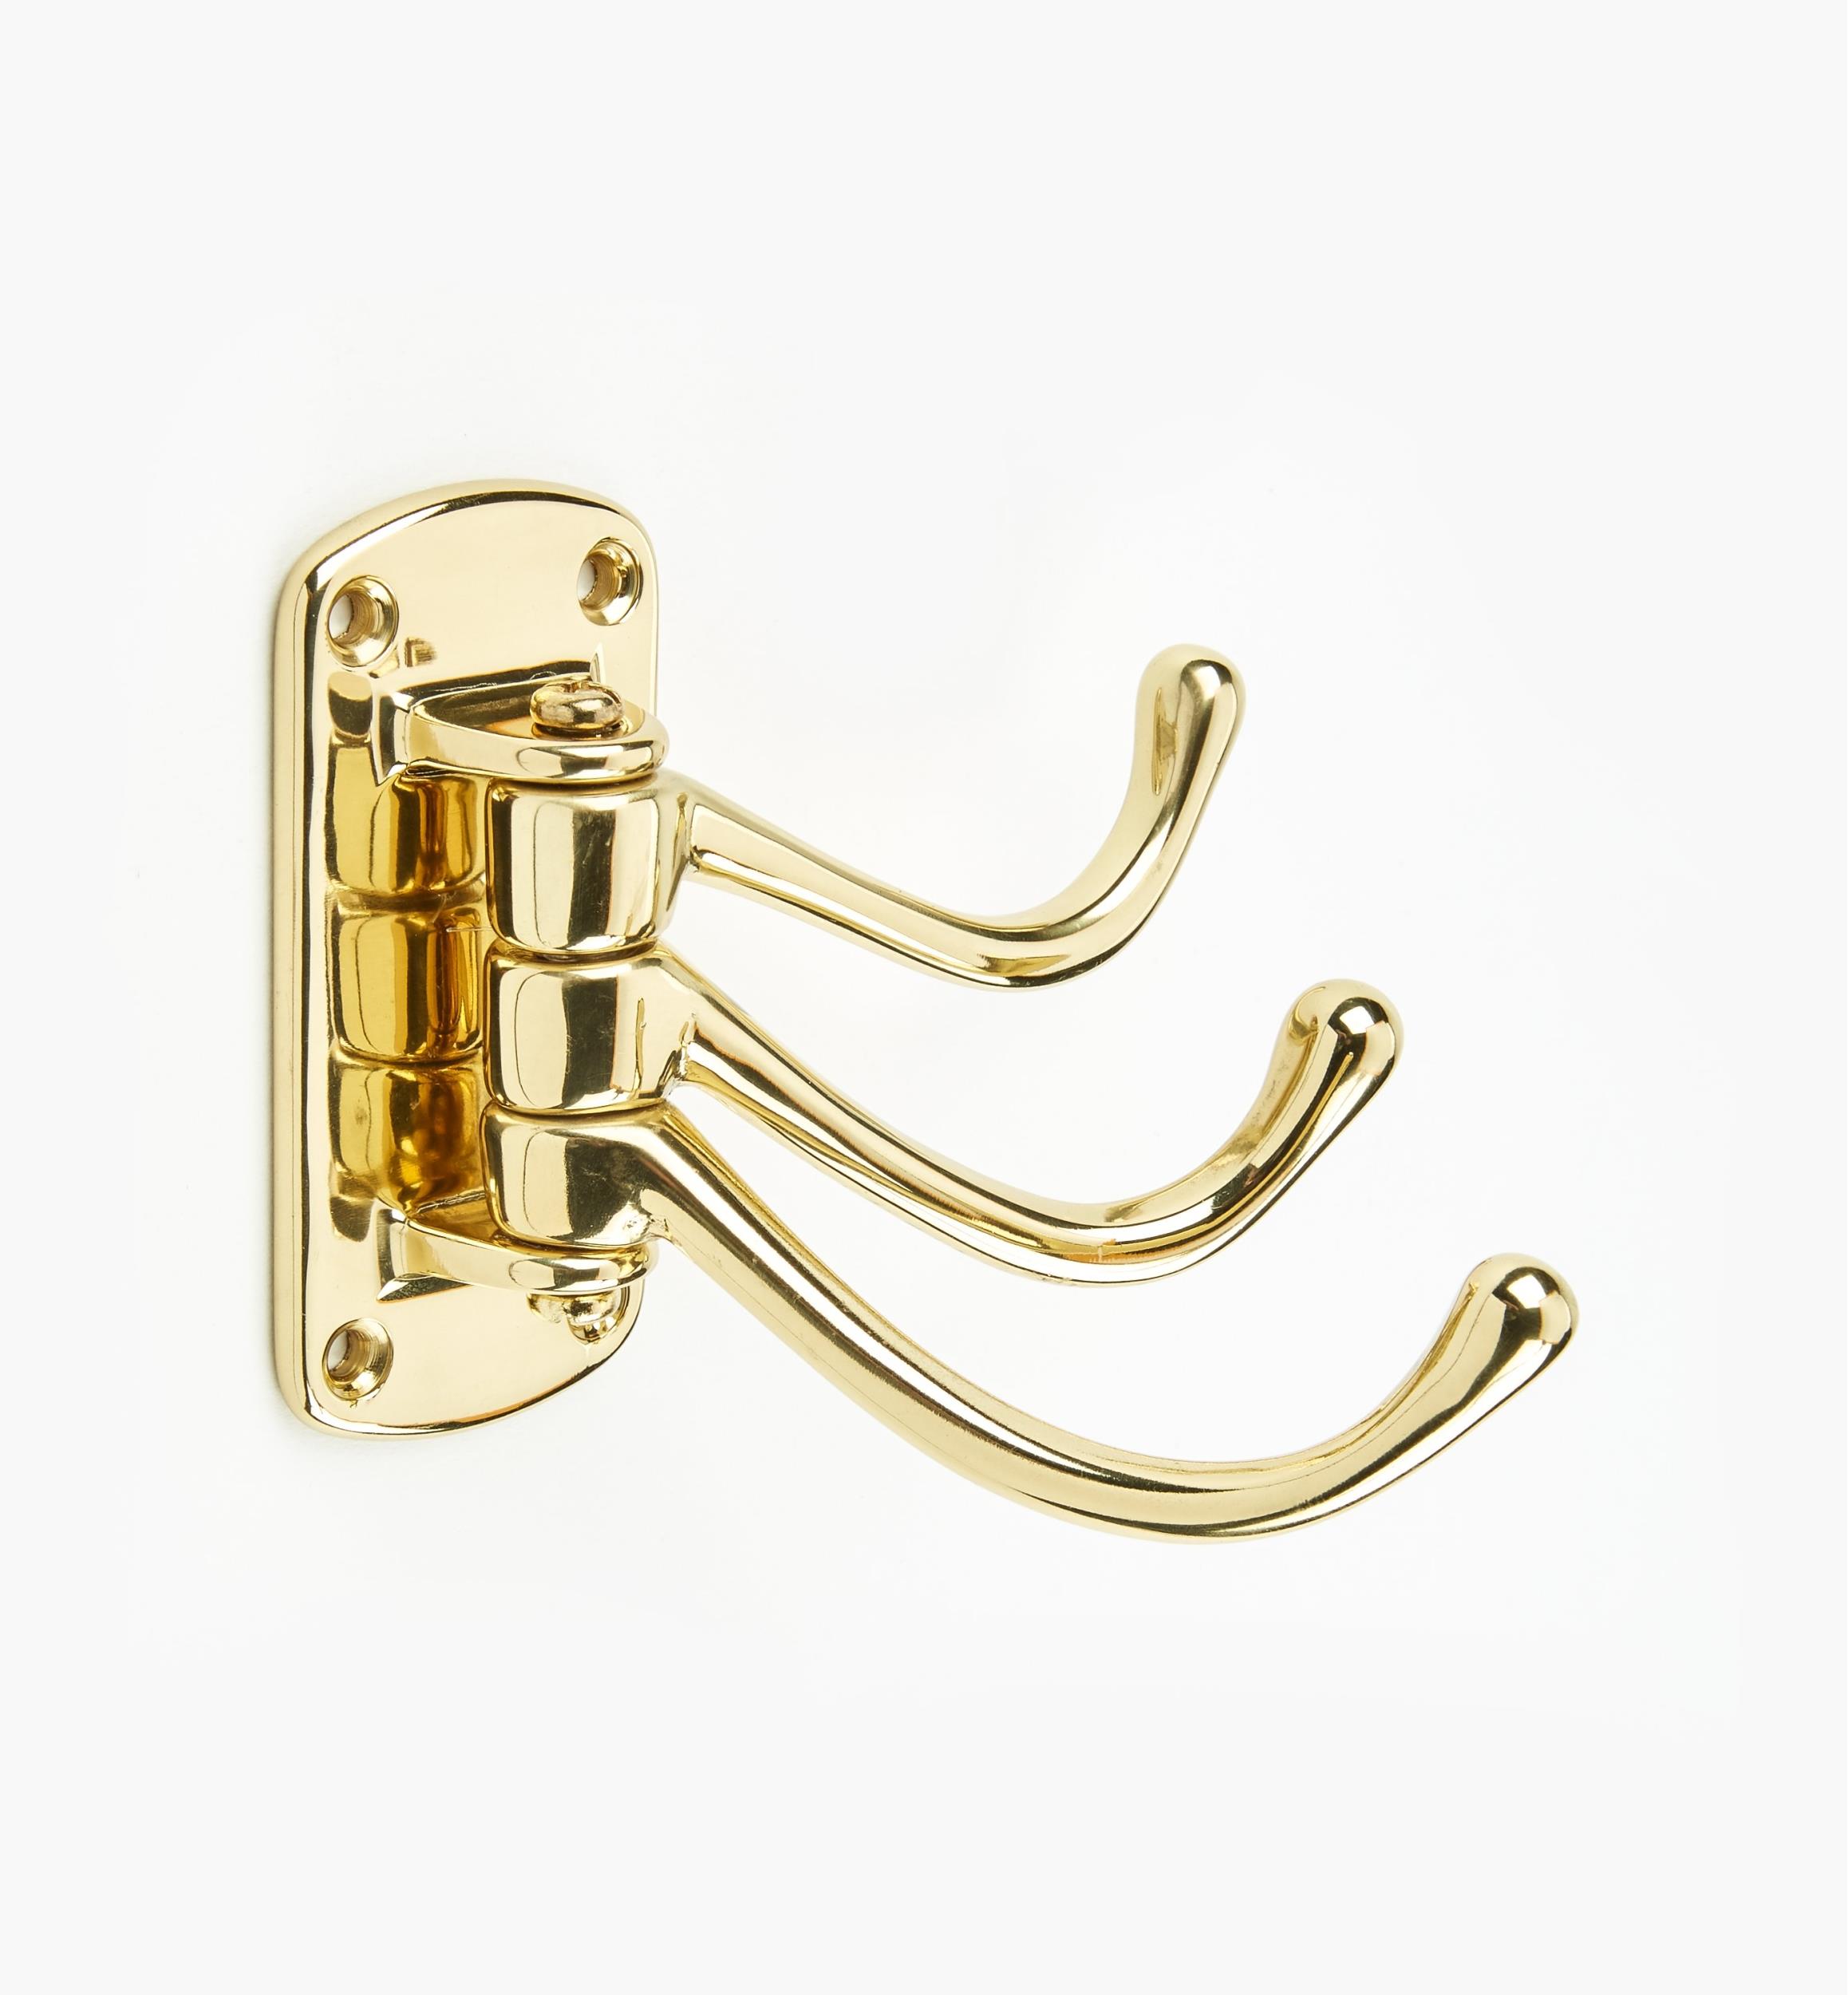 https://assets.leevalley.com/Size5/10082/00W8620-small-polished-brass-hook-f-05.jpg